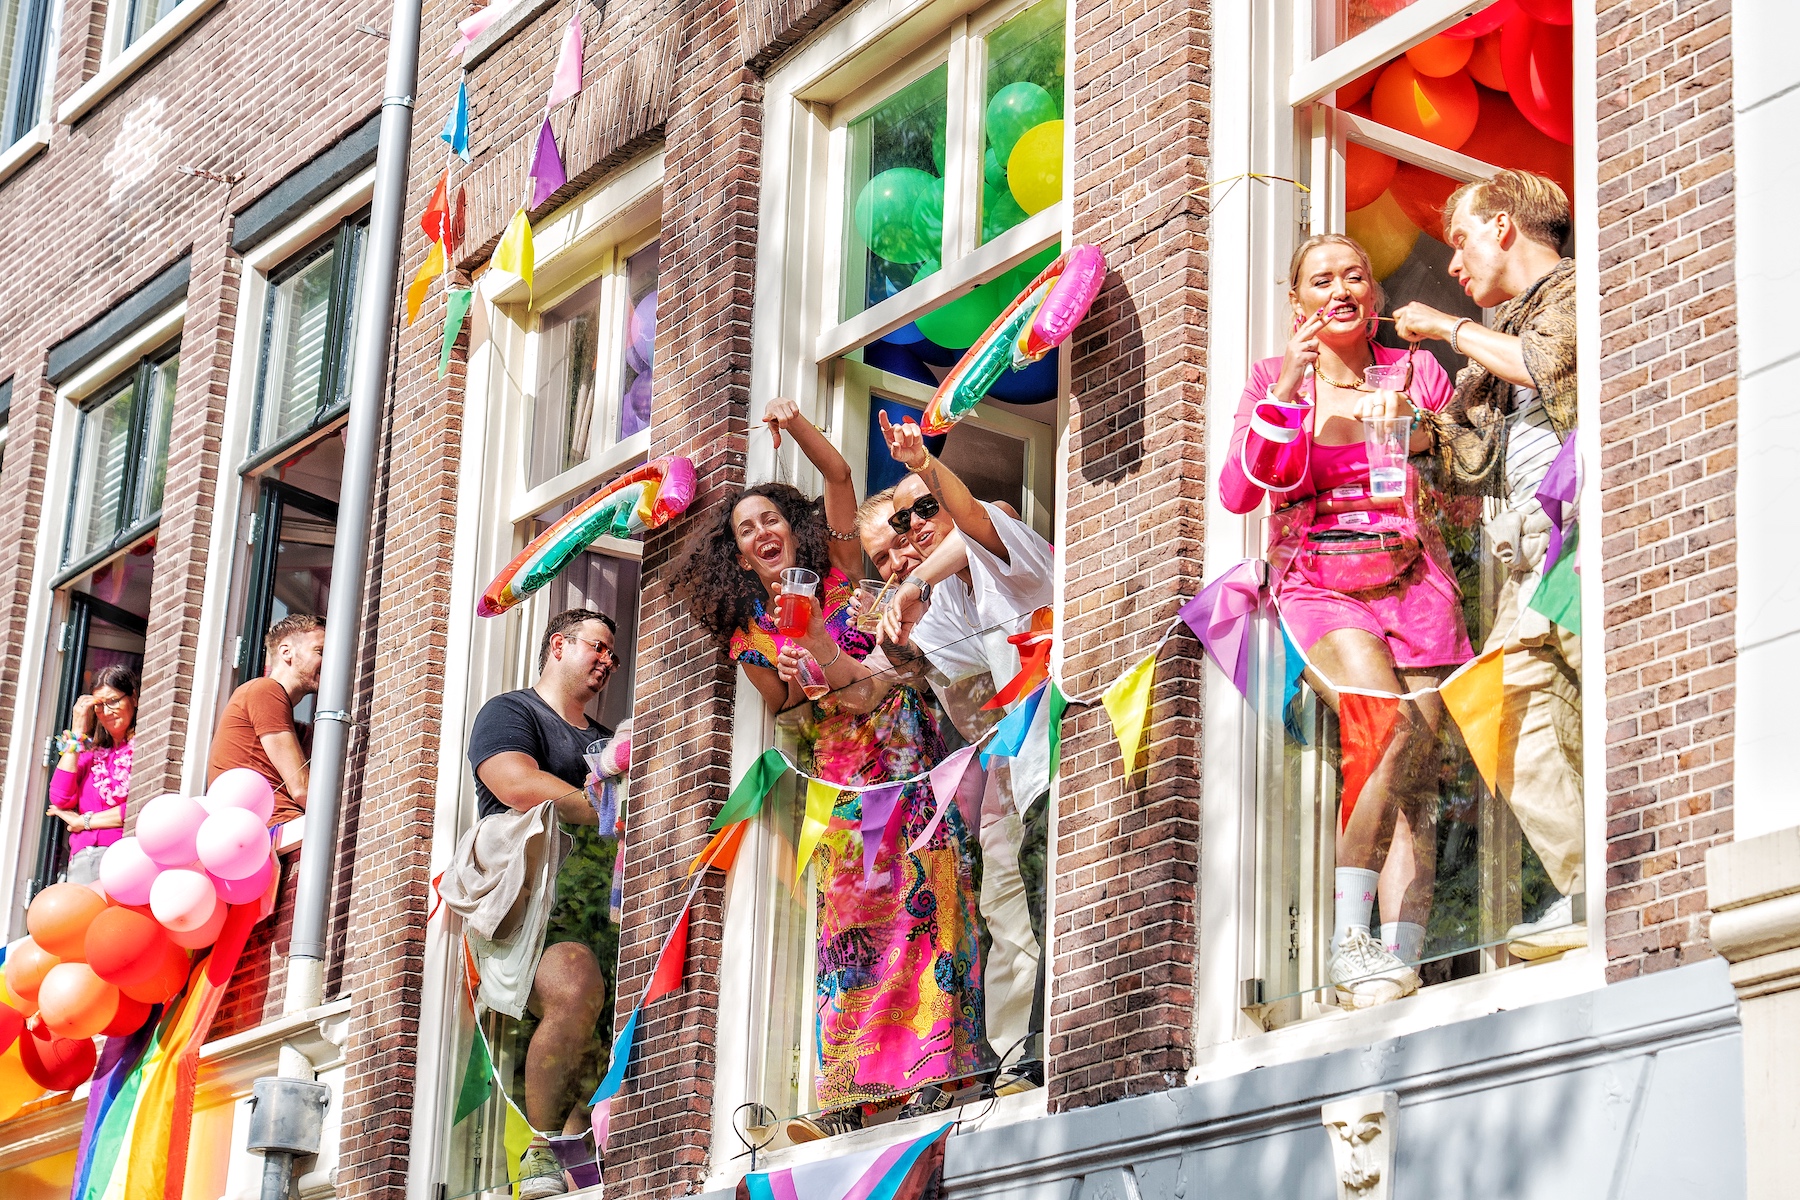 People stare out the window and wave in Amsterdam, Netherlands.